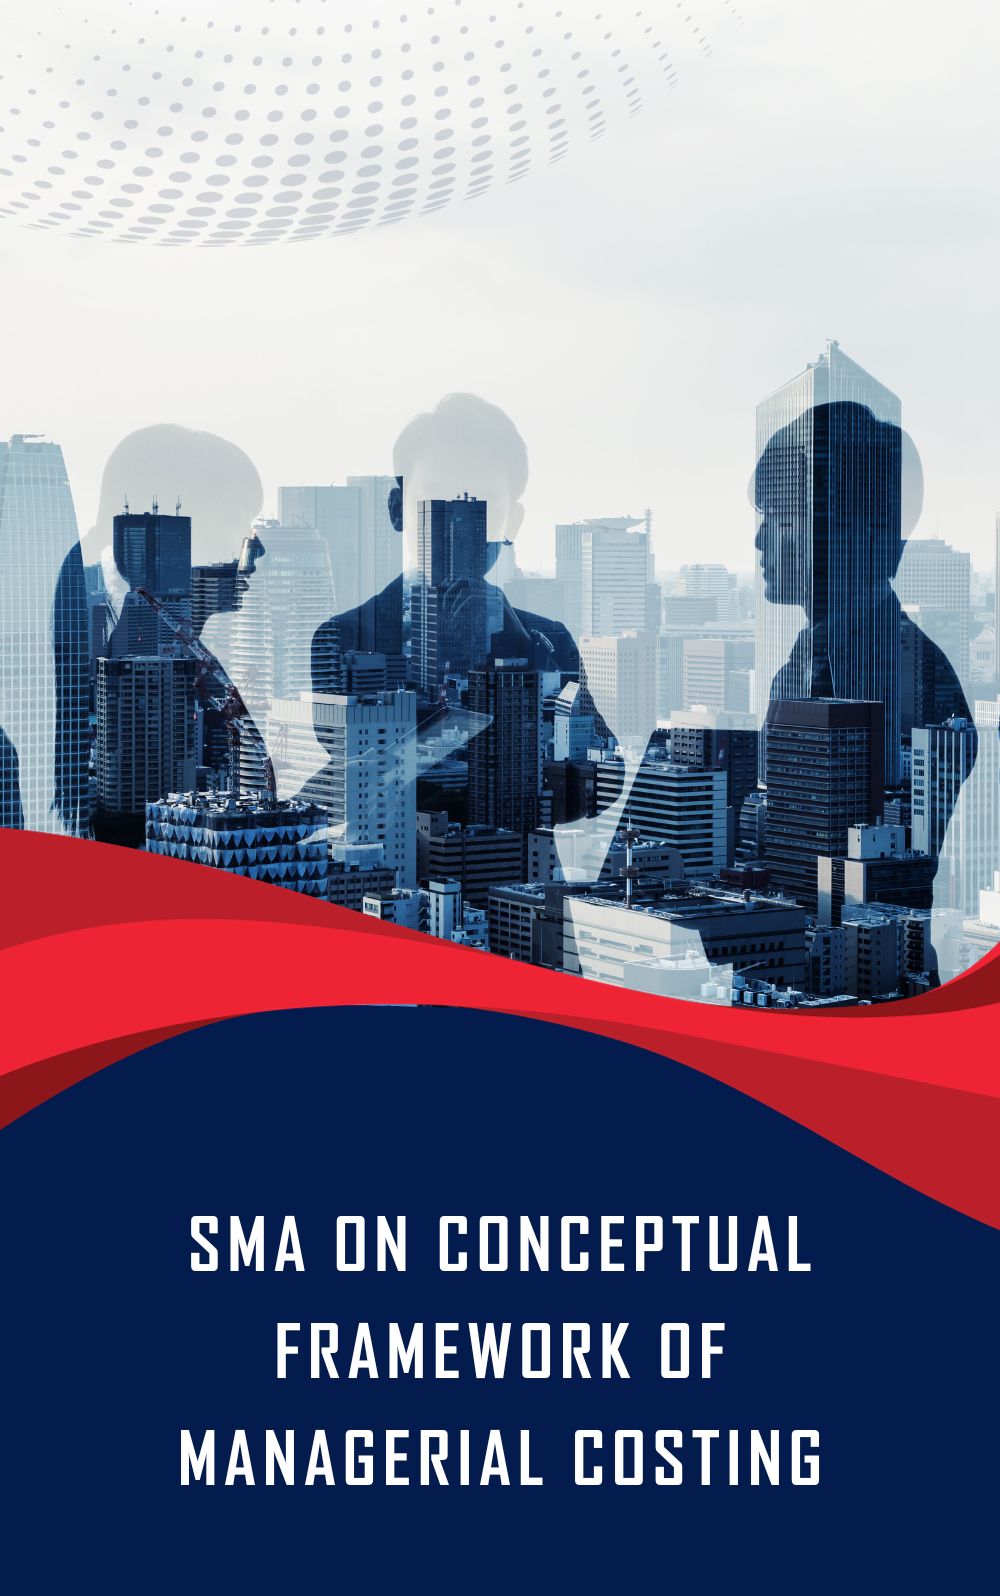 SMA on Conceptual Framework of Managerial Costing